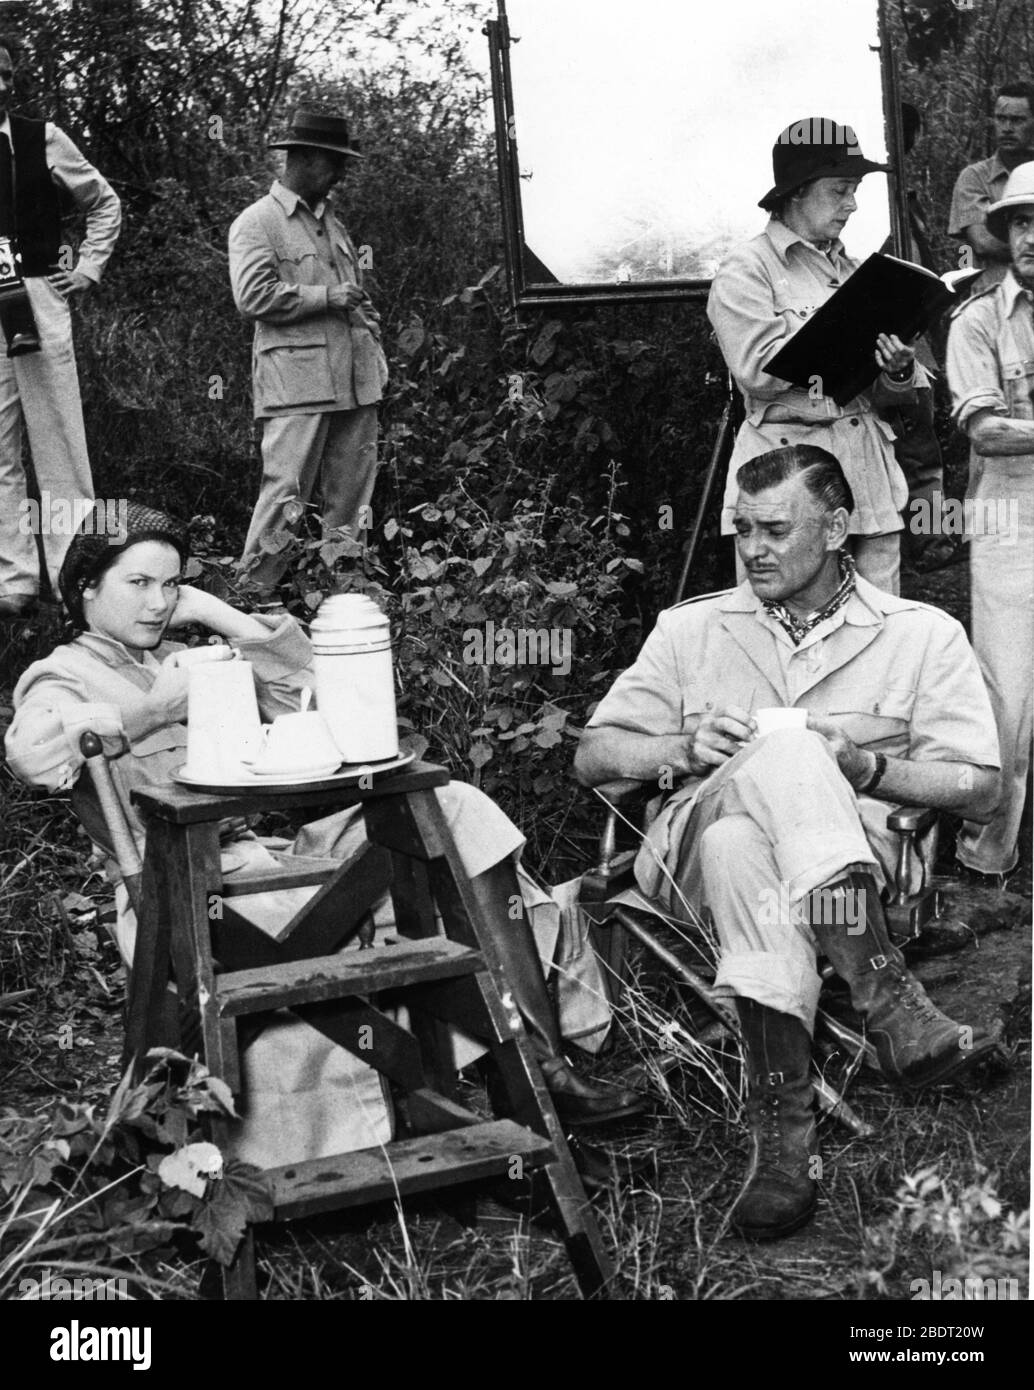 CLARK GABLE and GRACE KELLY on set location candid during filming in Africa for MOGAMBO 1953 director JOHN FORD screenplay John Lee Mahin play Wilson Collison Metro Goldwyn Mayer Stock Photo